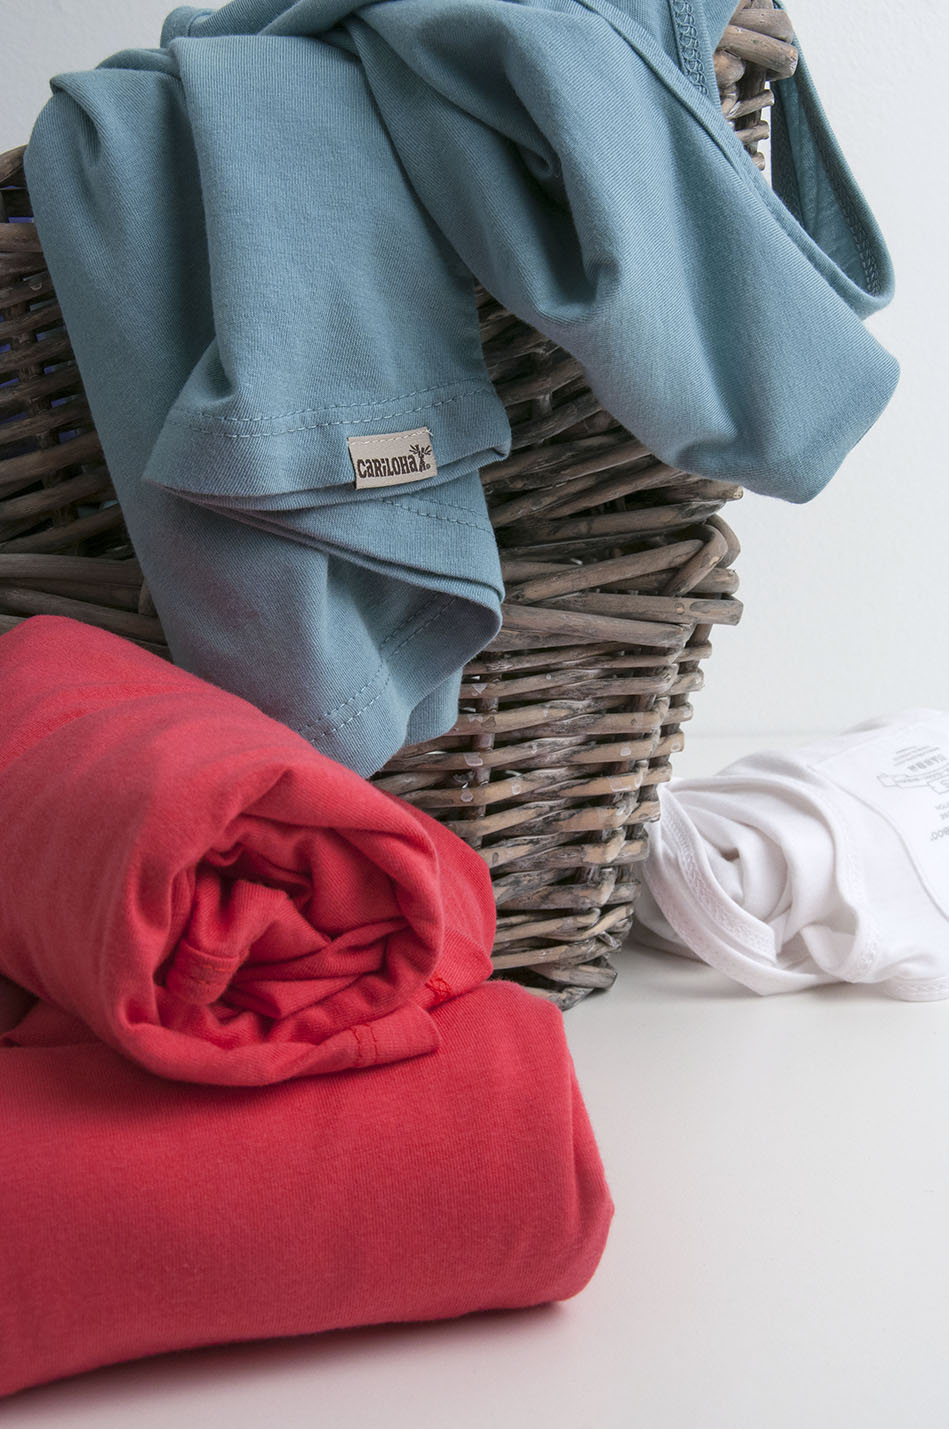 bamboo-clothes-in-basket-laundry